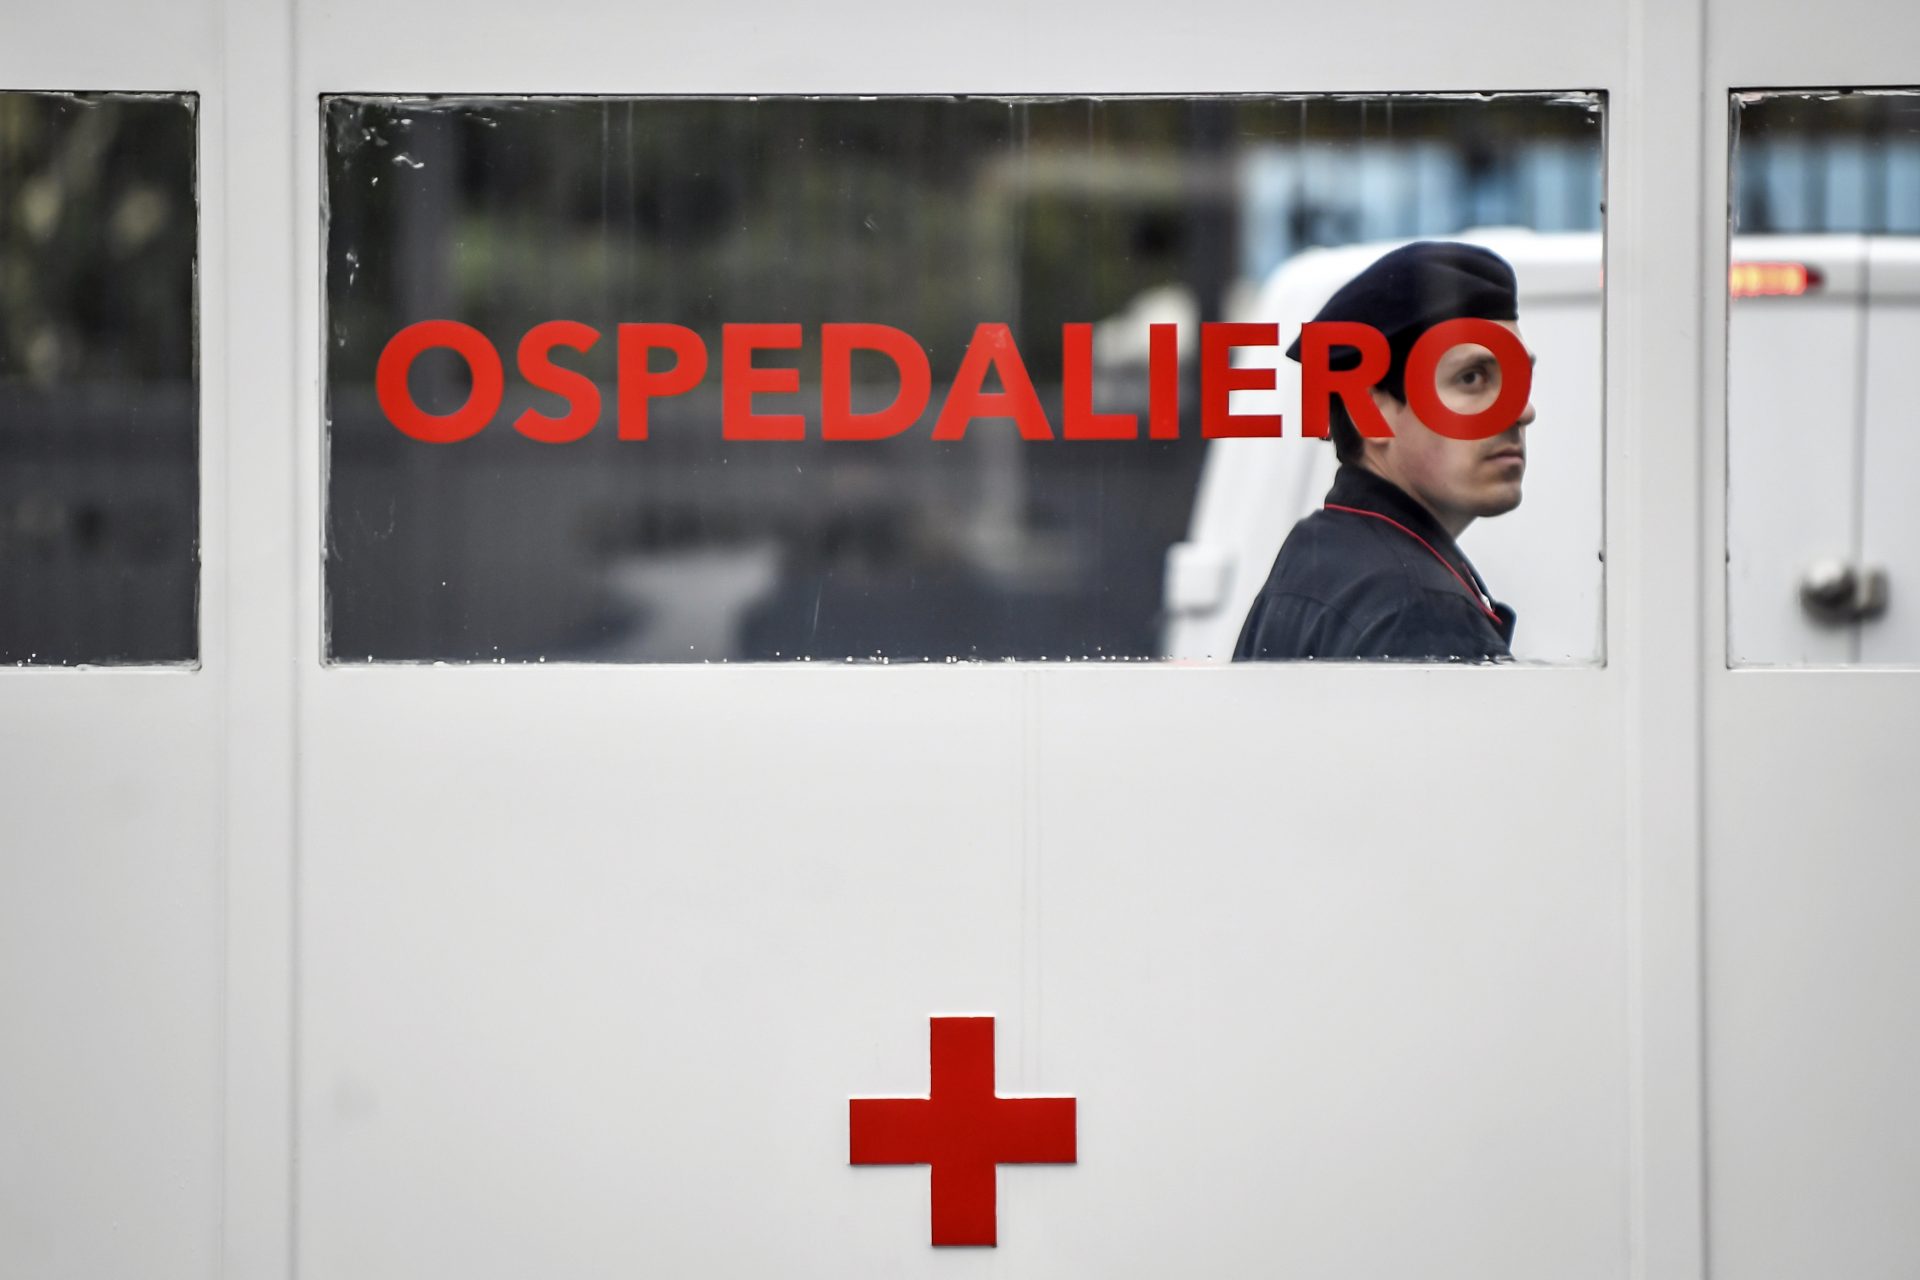 A Carabinieri (Italian paramilitary police) officer on patrol at former military hospital Baggio, which reopened a ward to hospitalize patients recovering from the COVID-19 virus, in Milan, Italy, Tuesday, March 2, 2020. The strain on Lombardy's health system has forced authorities to seek to bring doctors out of retirement, accelerate graduation dates for nursing students, and incorporate doctors and hospital beds from the private sector to ease the strain on public hospitals.